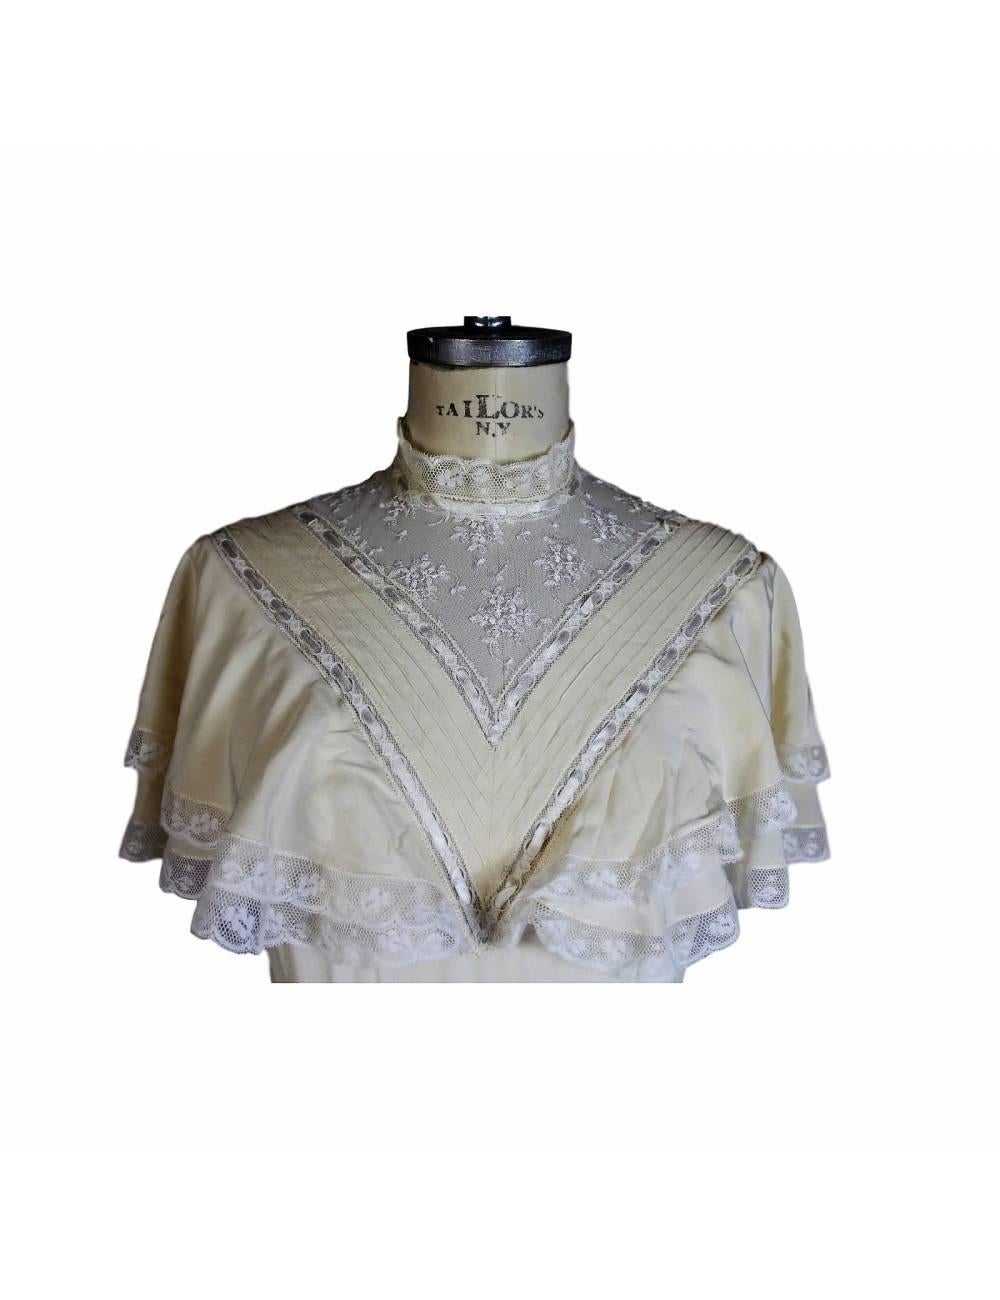 Vintage sartorial silk wedding dress 1980s with lace inserts. The dress has leaps on the chest and is tightened at the waist by a band, falls soft to the ankles. Ivory. Good vintage condition some small stains.

SIZE 44 10 US 12 UK 


Length: 140